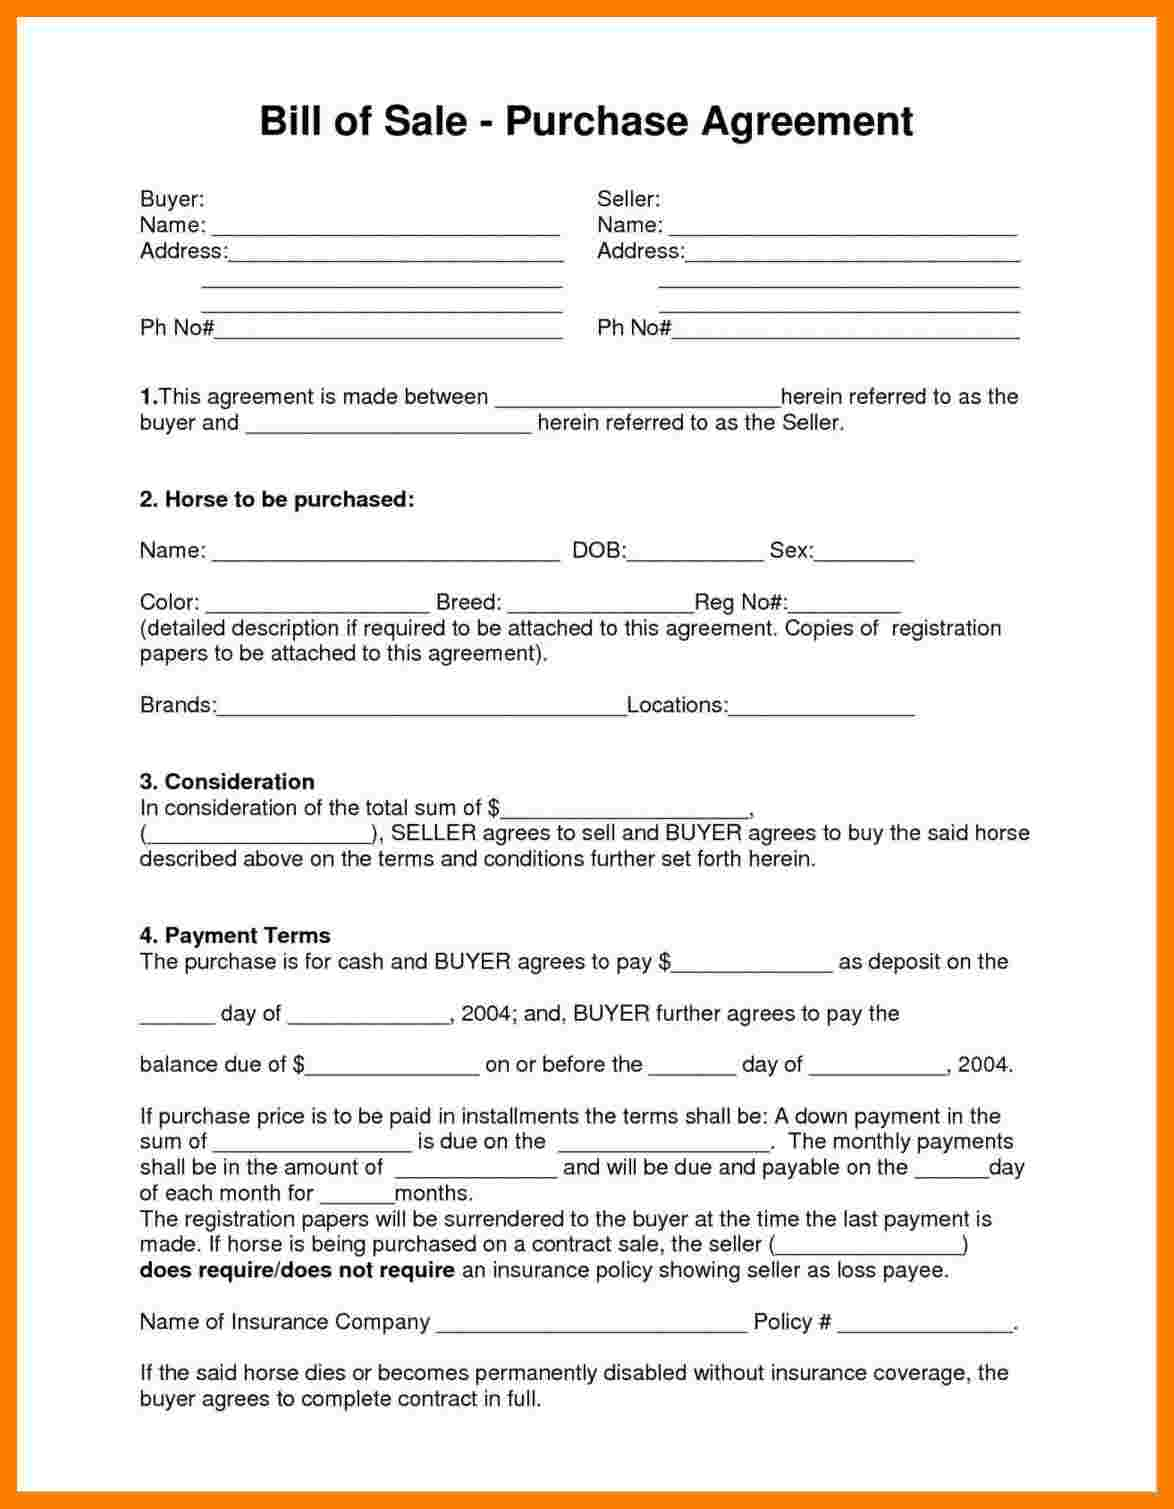 Printable Horse Bill Of Sale Form That Are Clean | Melvin Within Horse Bill Of Sale Template